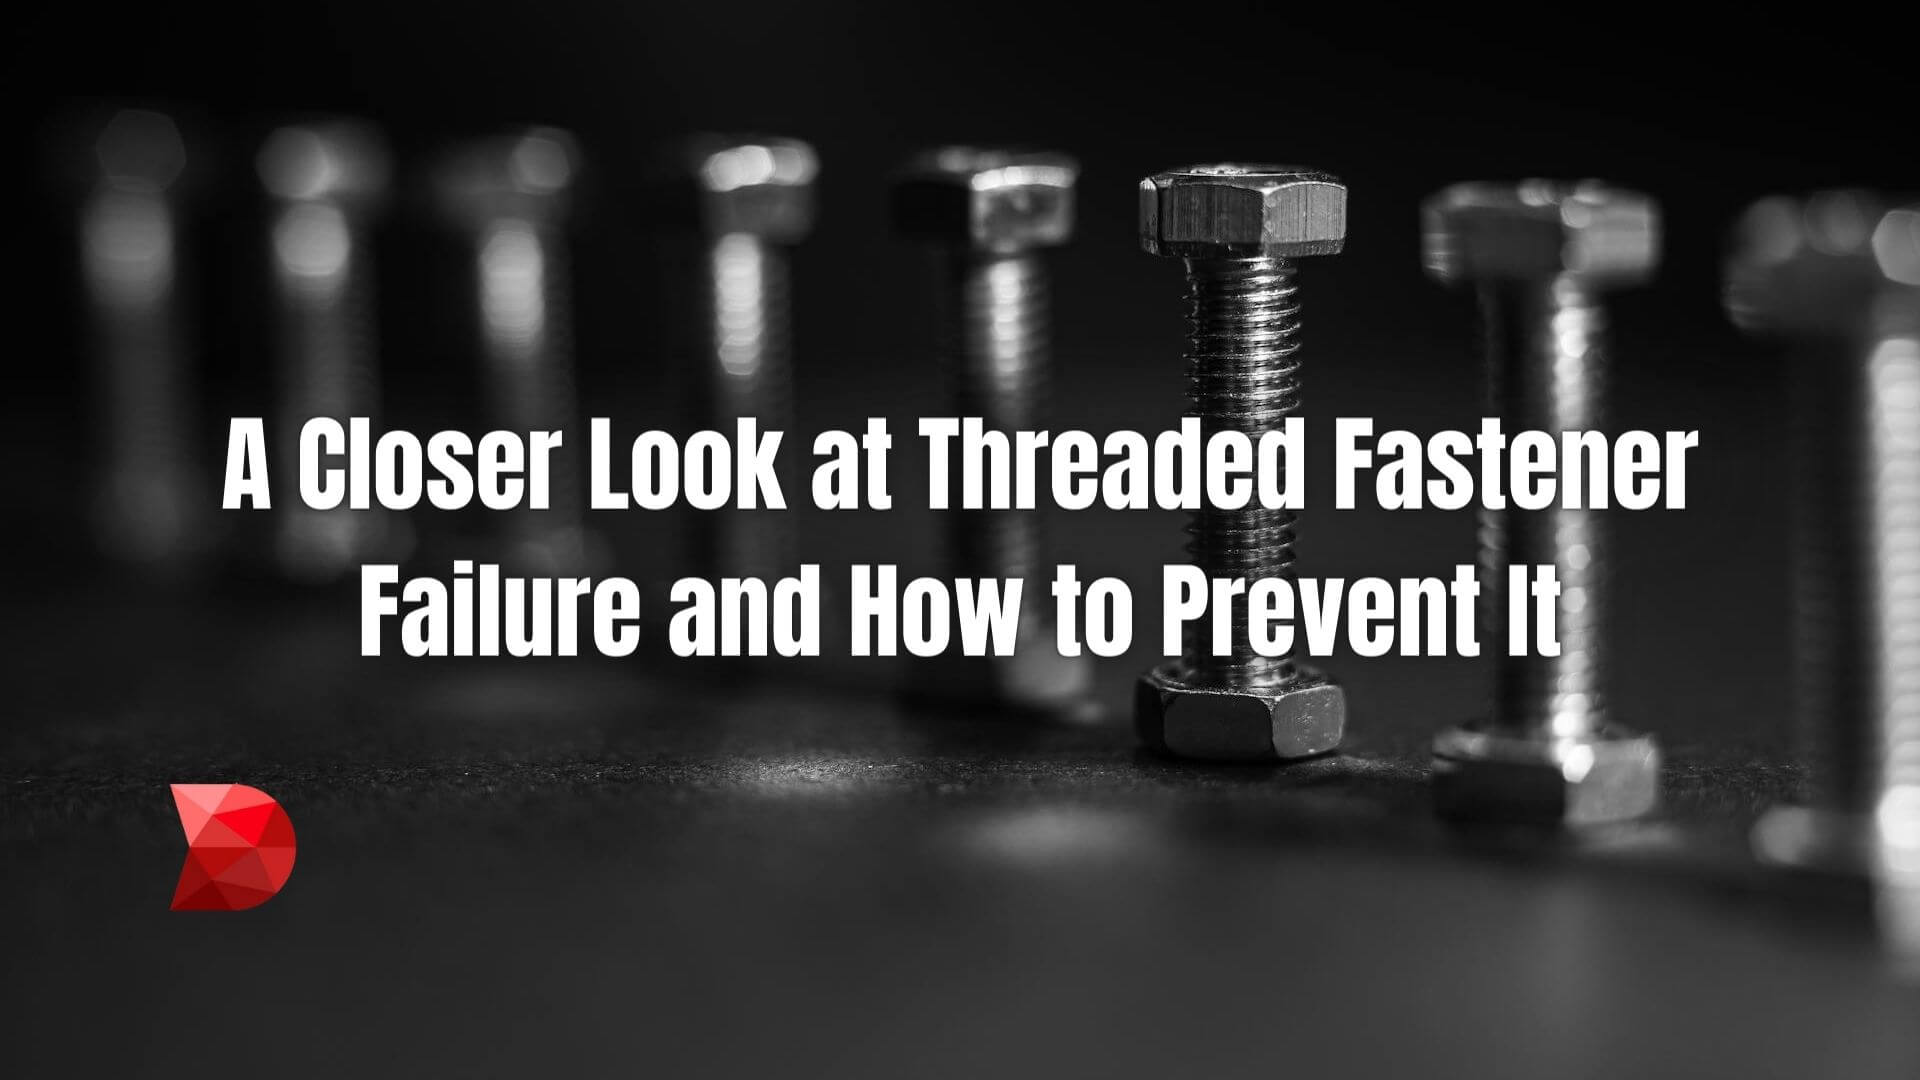 Don't let threaded fastener failures derail your projects. Click here to discover its causes and learn expert tips to prevent it.